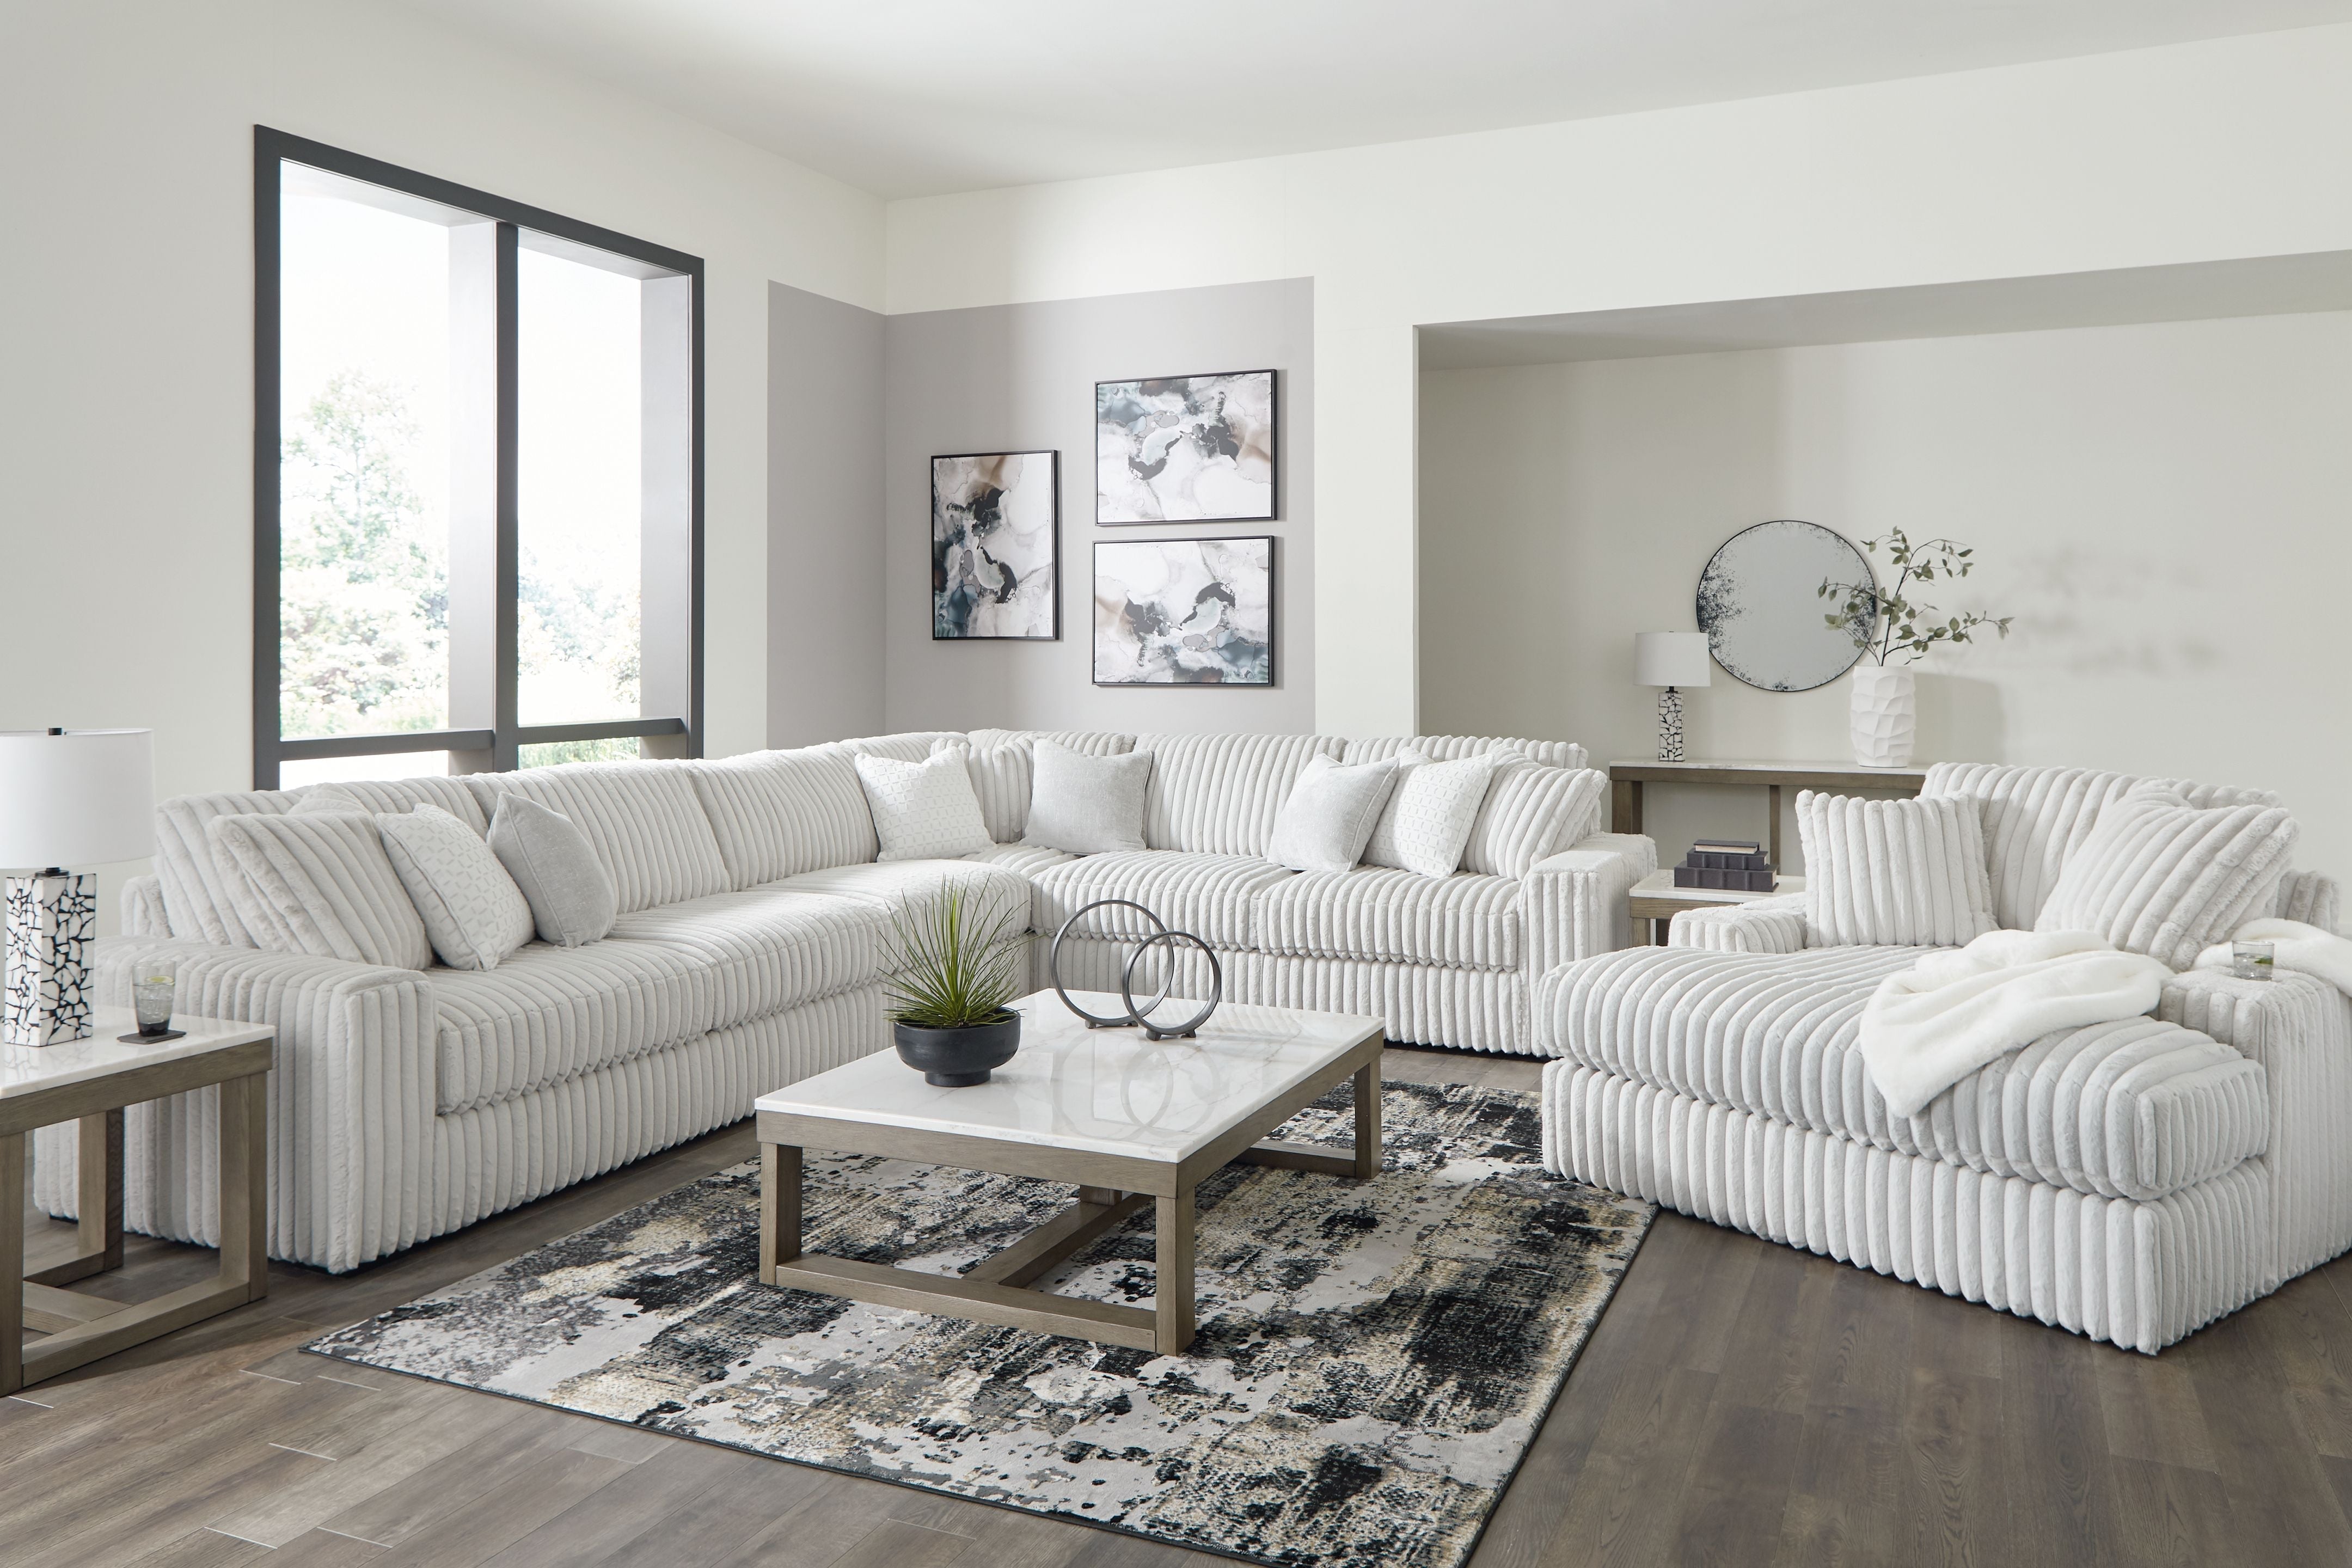 Stupendous Living Room Set - Modern Sectional, Comfy Chaise, Retro Corduroy